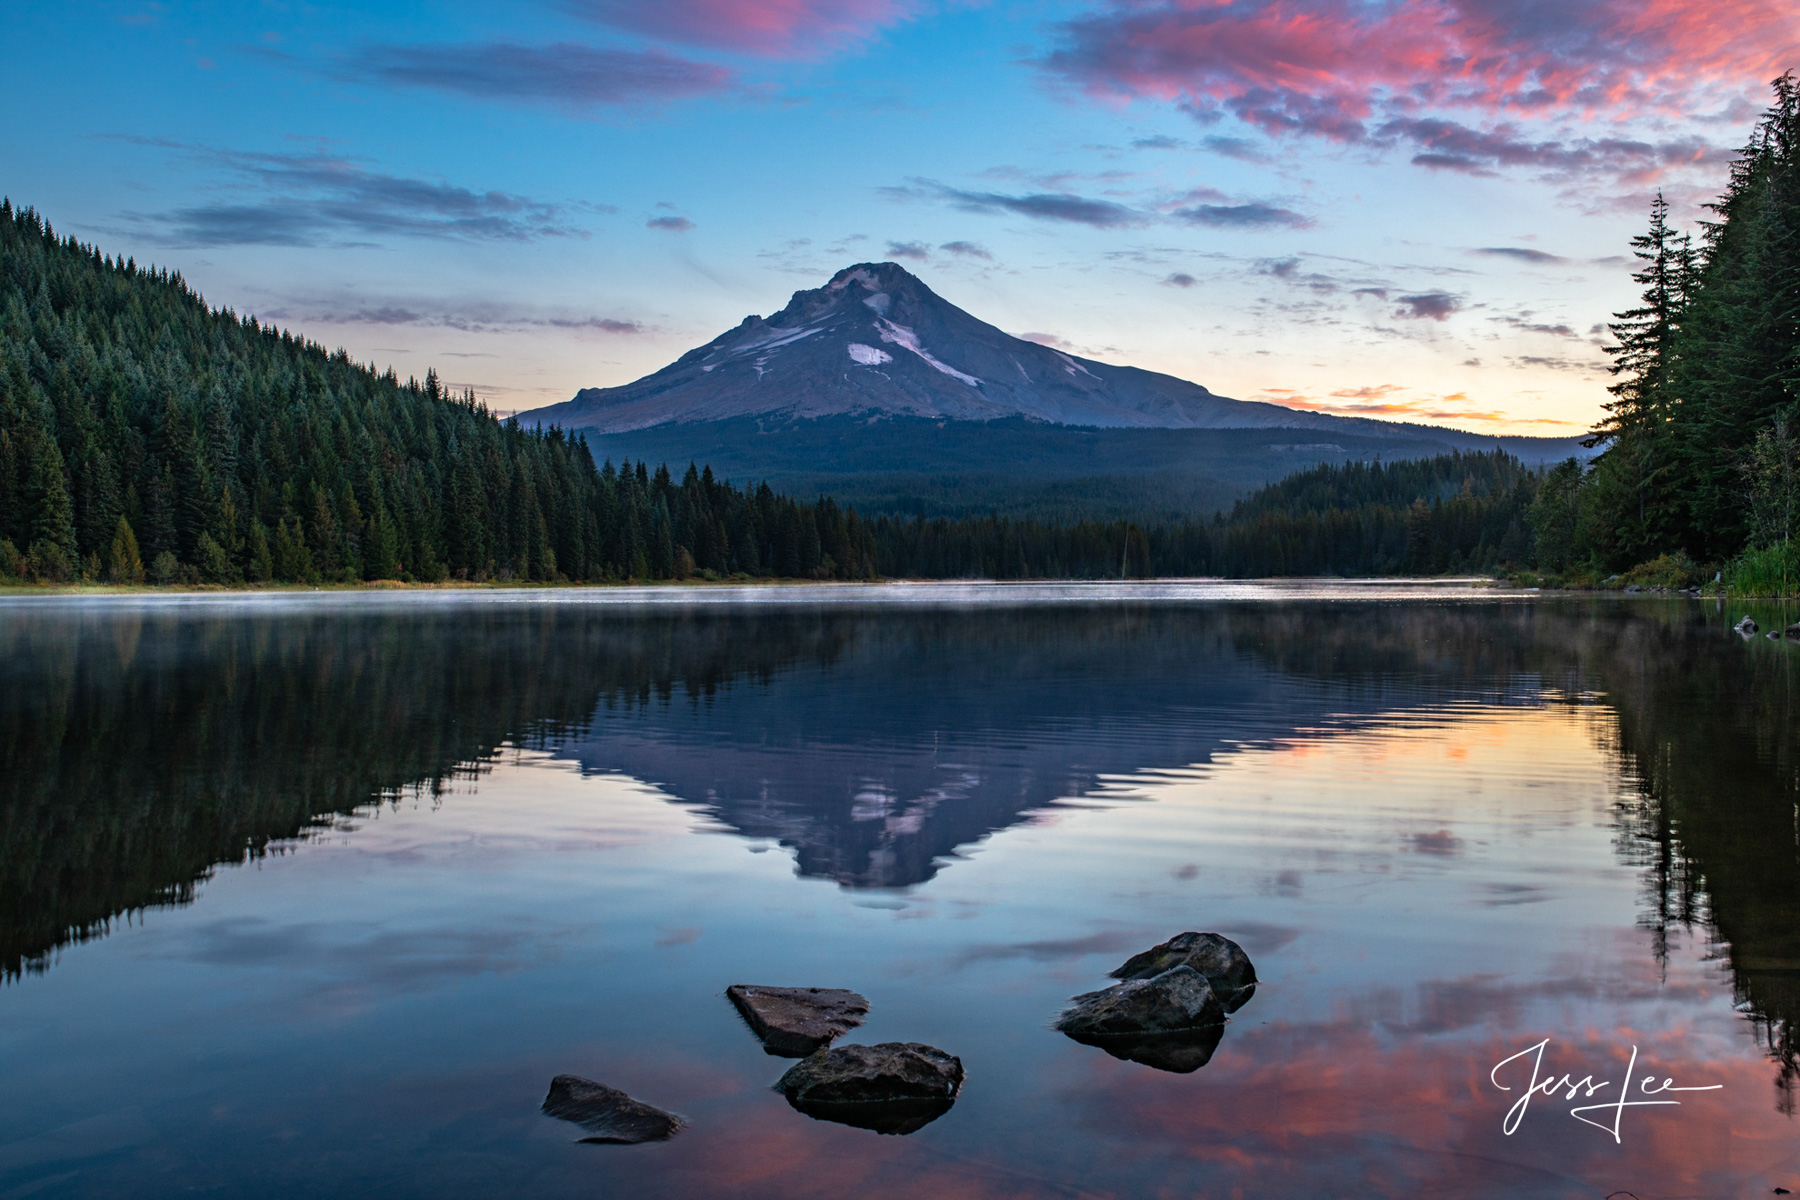 Limited Edition of 50 exclusive high-resolution Museum Quality Fine Art Prints of Mount Hood reflecting in Trillium Lake with...